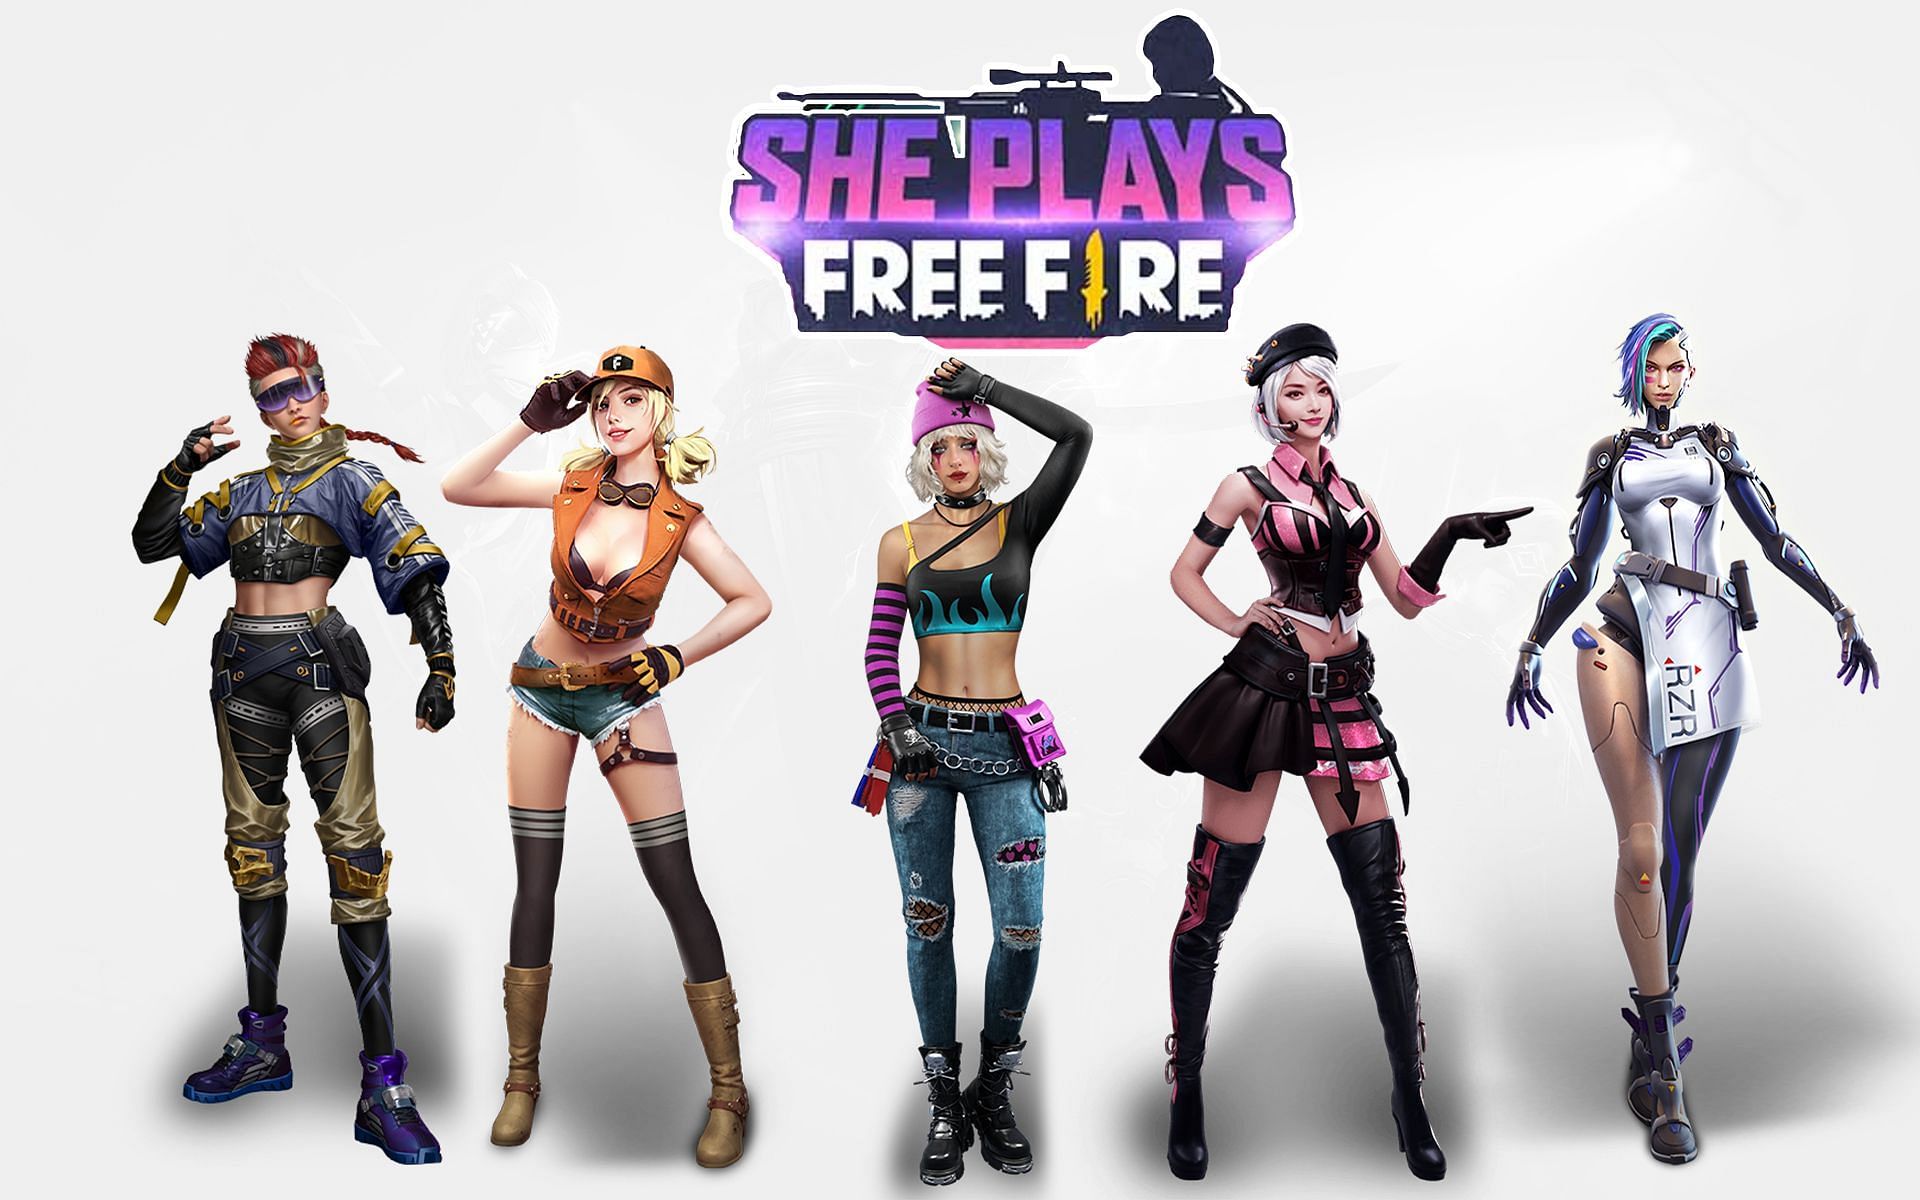 Five popular female characters that players can purchase (Image via Sportskeeda)